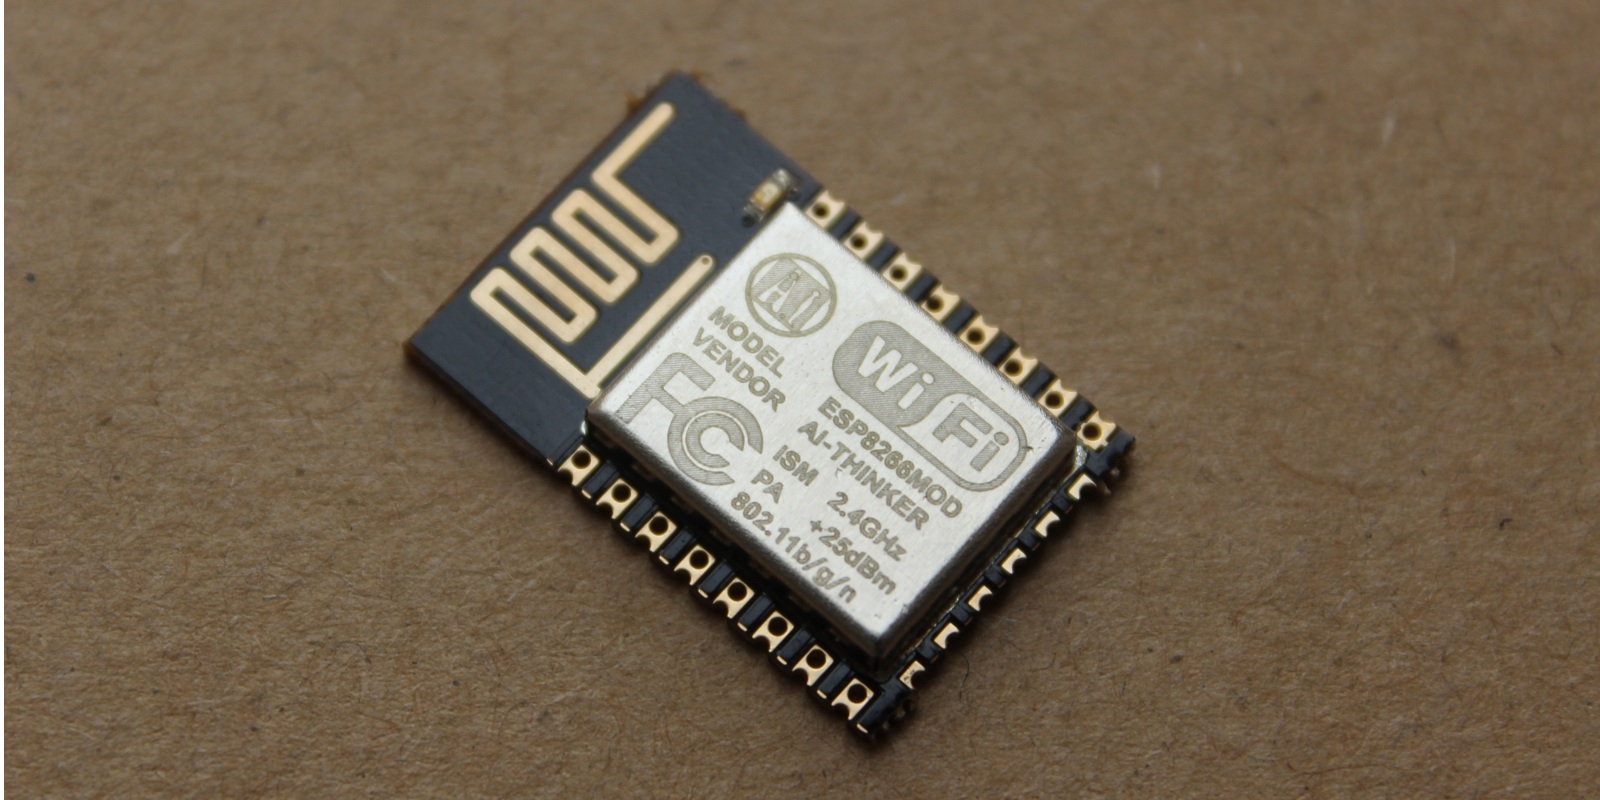 How to load Souliss on ESP8266.